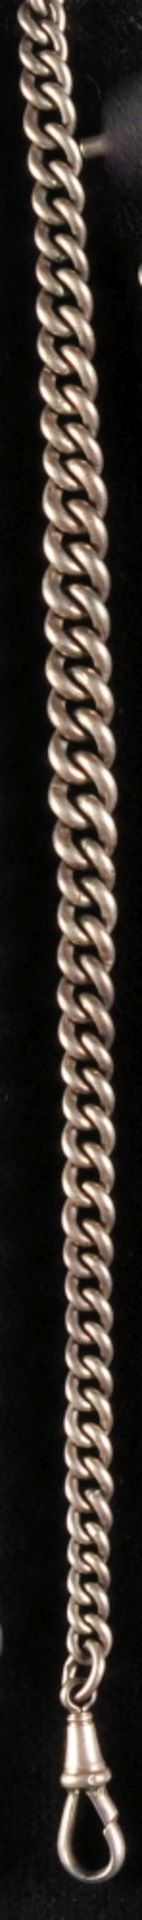 Silver, English pocket watch chain, armoured links, gradient